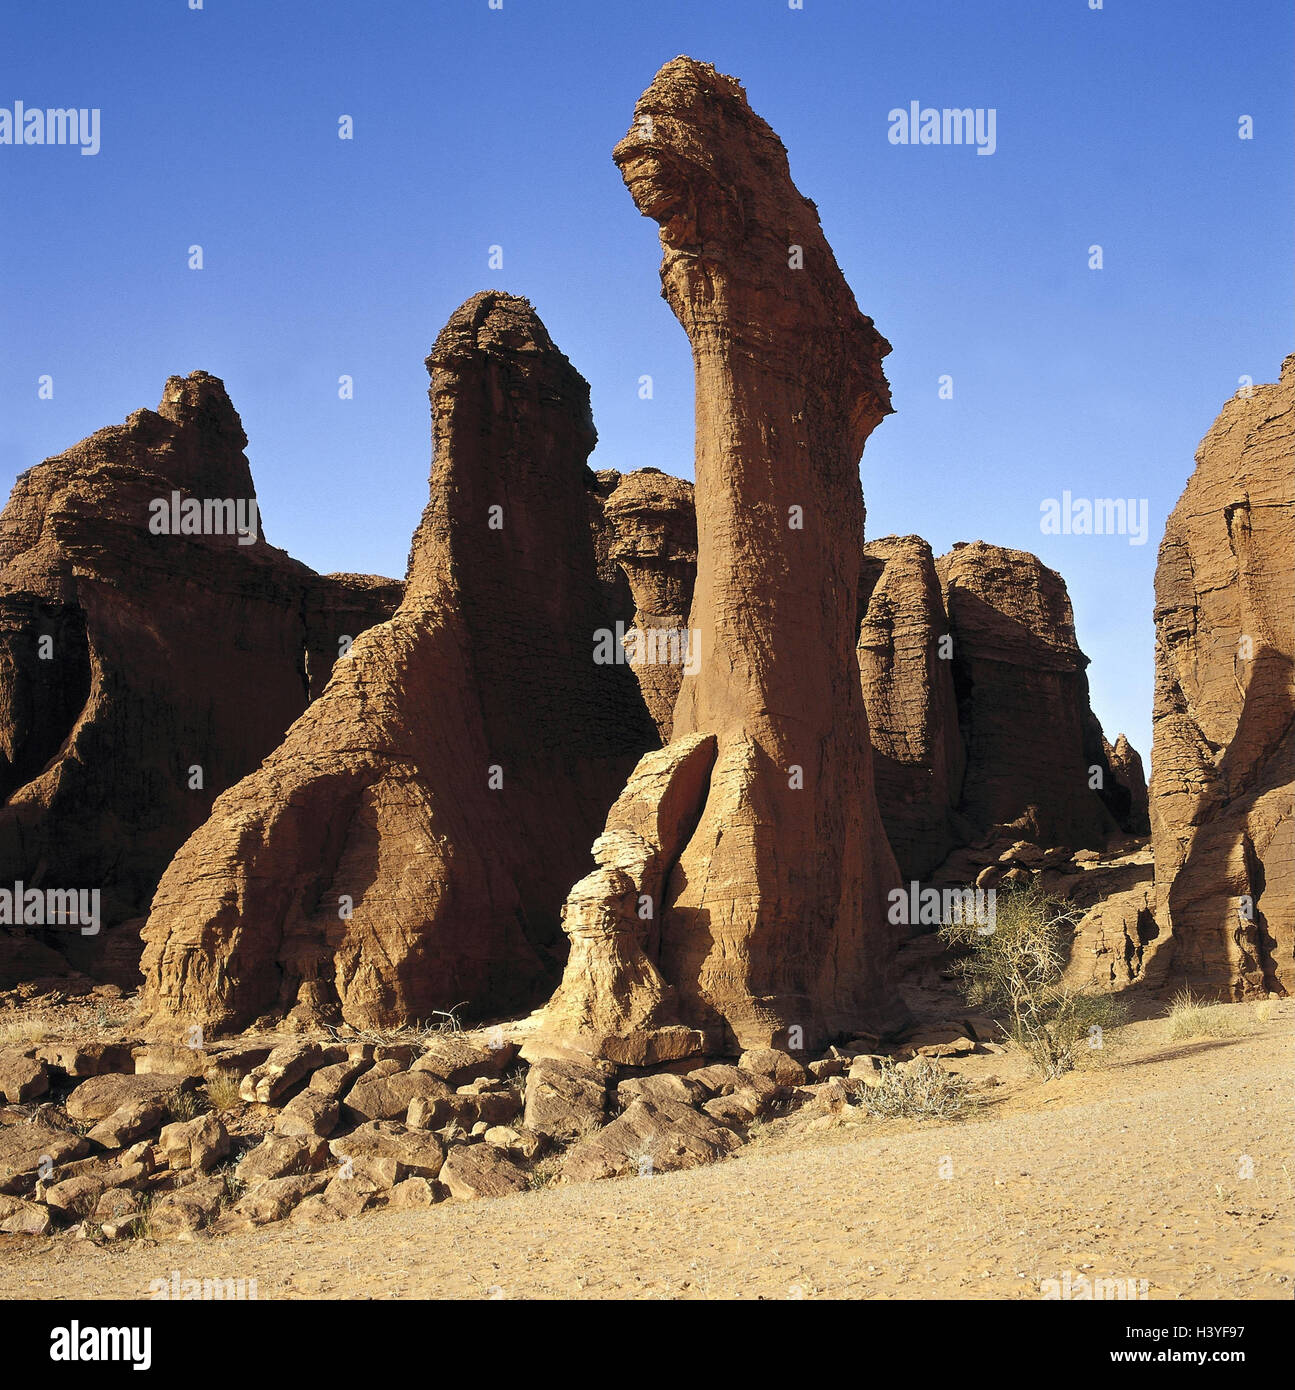 Chad, mesa country Ennedi, Georges d'Archei, Fada, bile formations, 'camel head' Central, Africa, landlocked country, Sahara, mountainous country, sediment rock, rock, bile formation, 'fairy chimneys', boulders, nature, imagination, Stock Photo